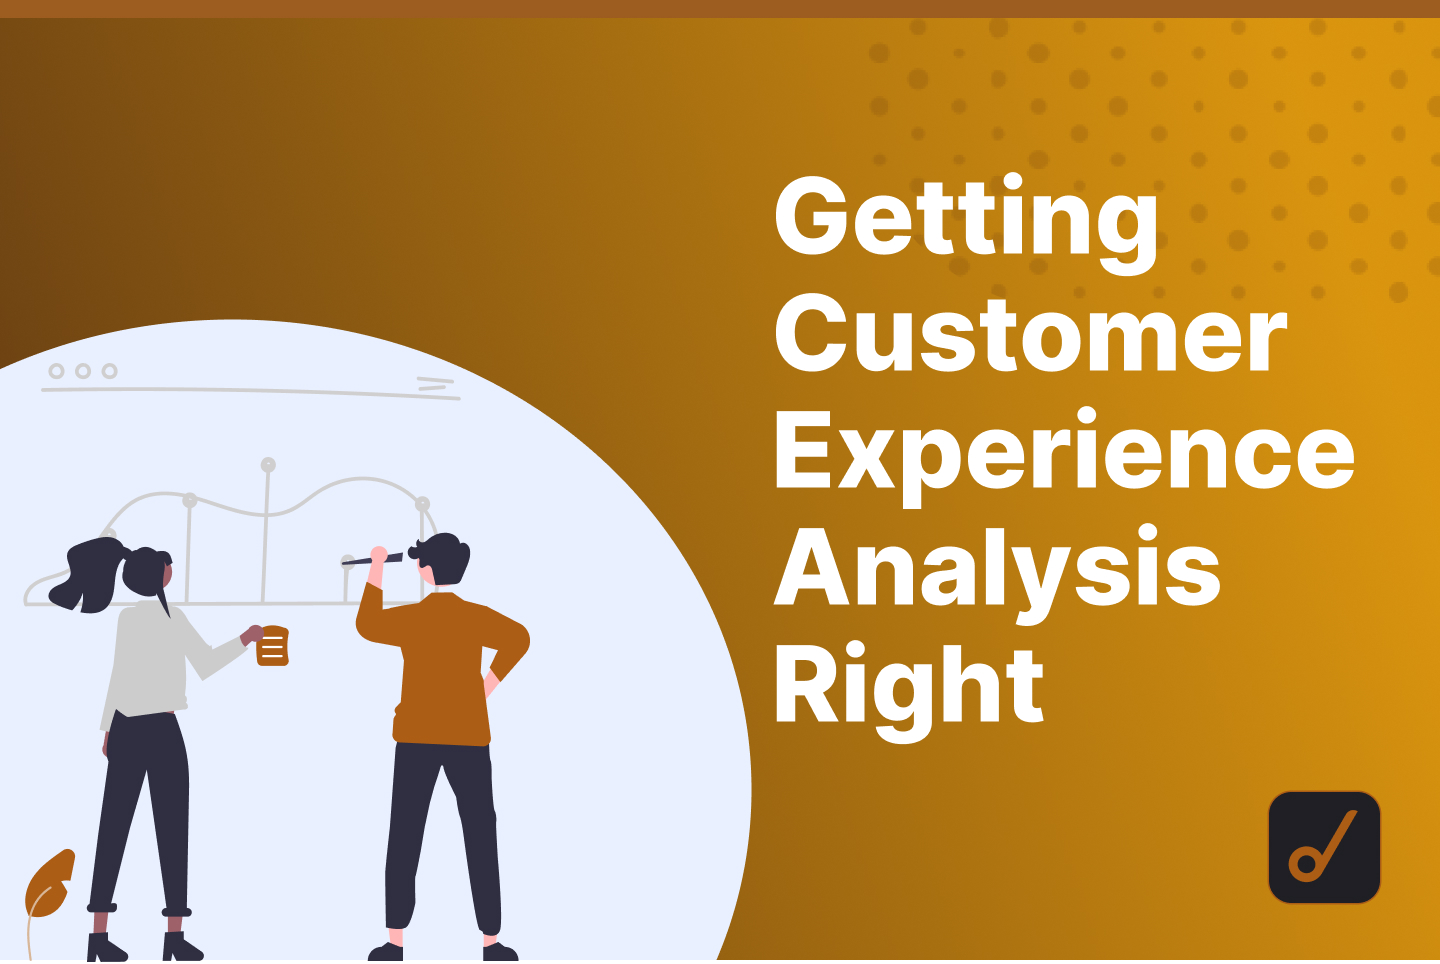 5 Strategies for Conducting Customer Experience Analysis